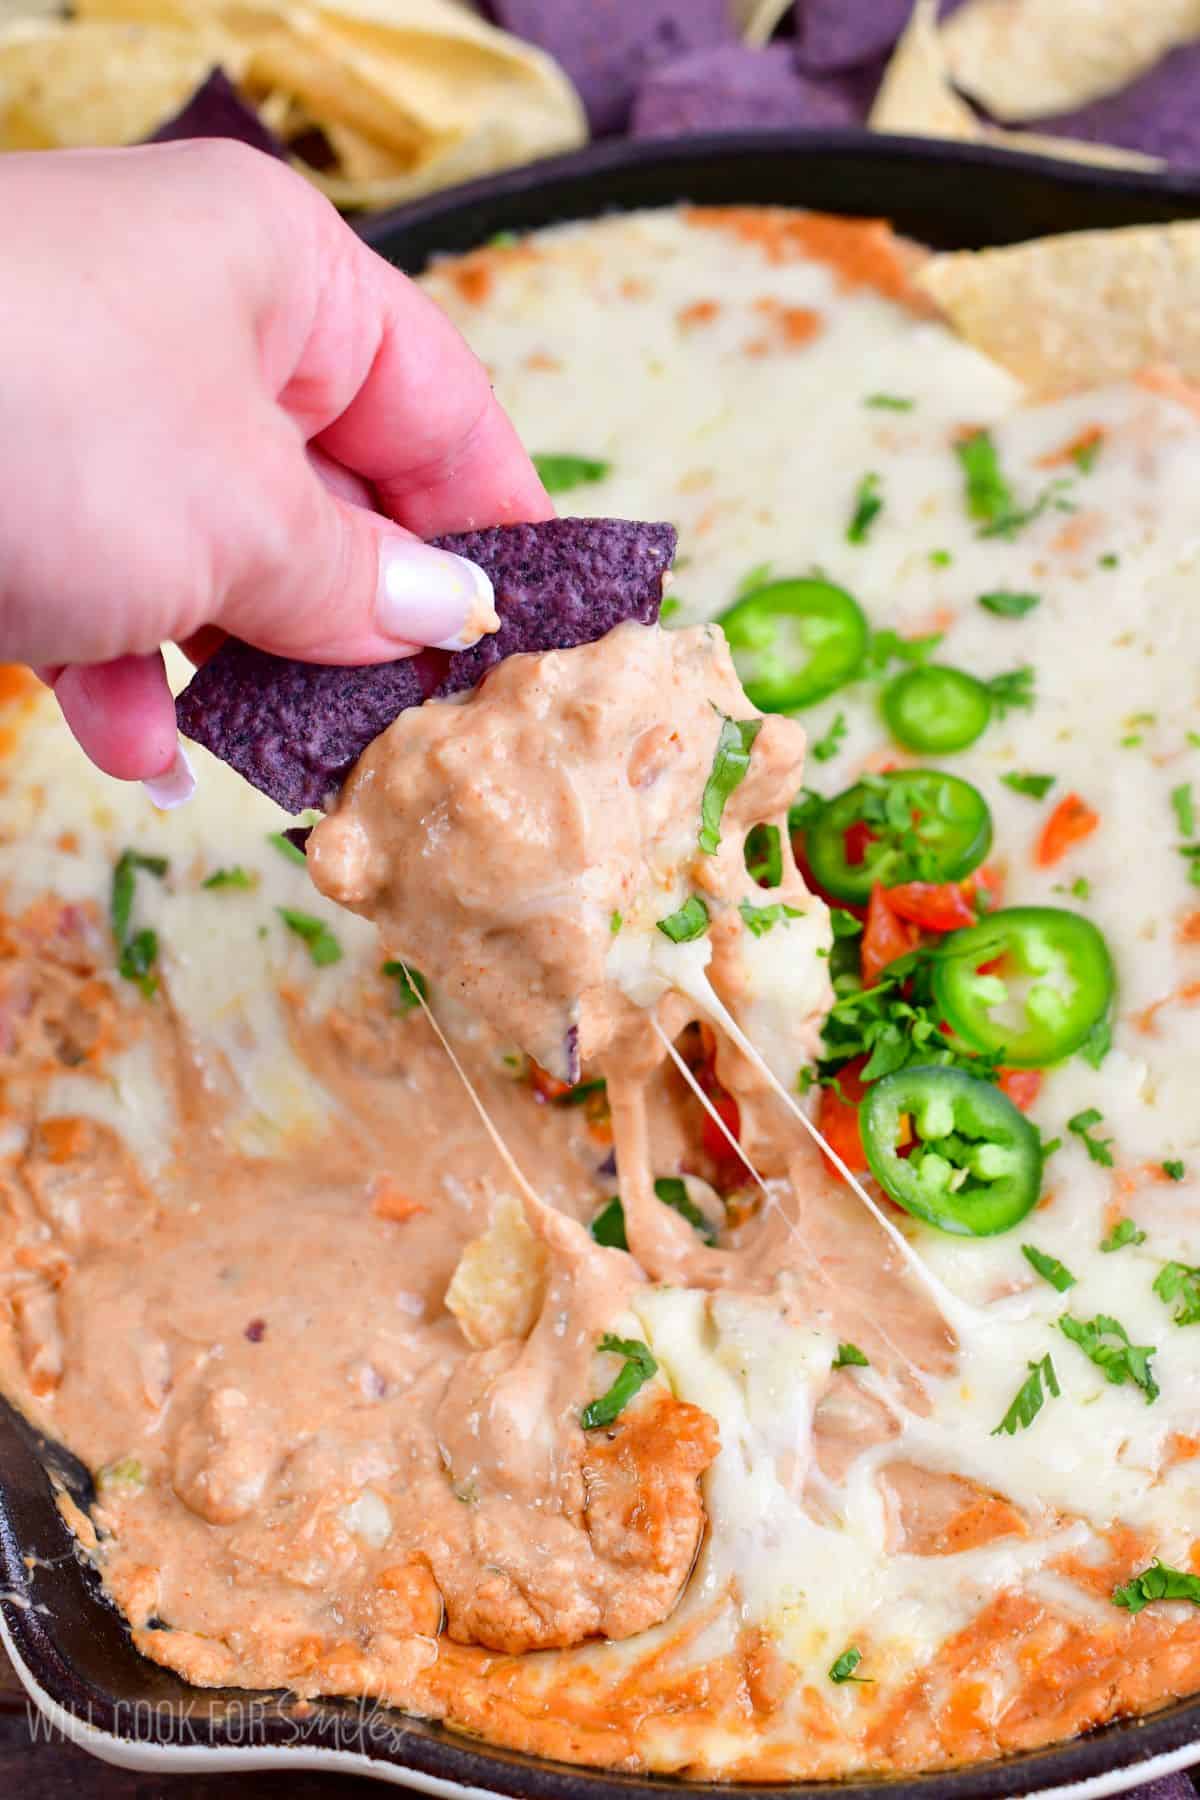 scooping hot bean dip with some tortilla chips from the skillet.